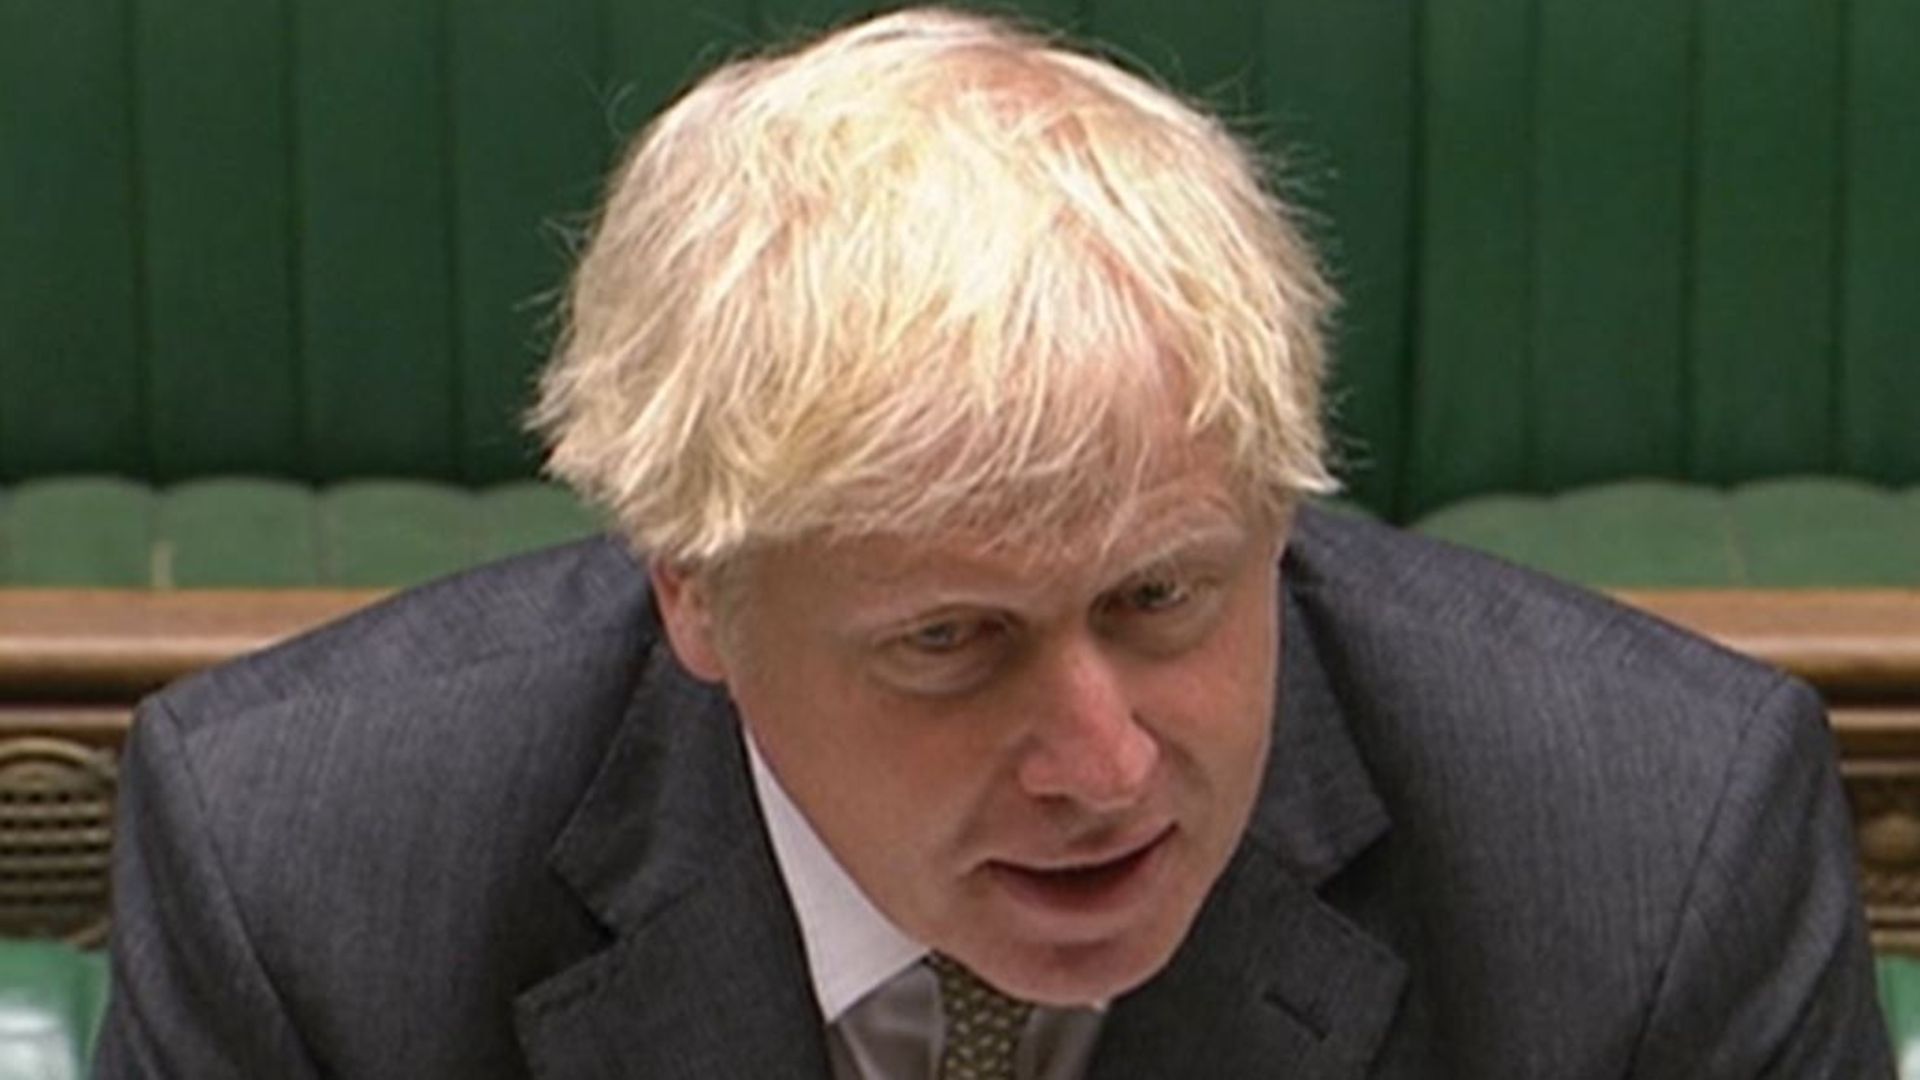 Prime Minister Boris Johnson in the House of Commons - Credit: PA